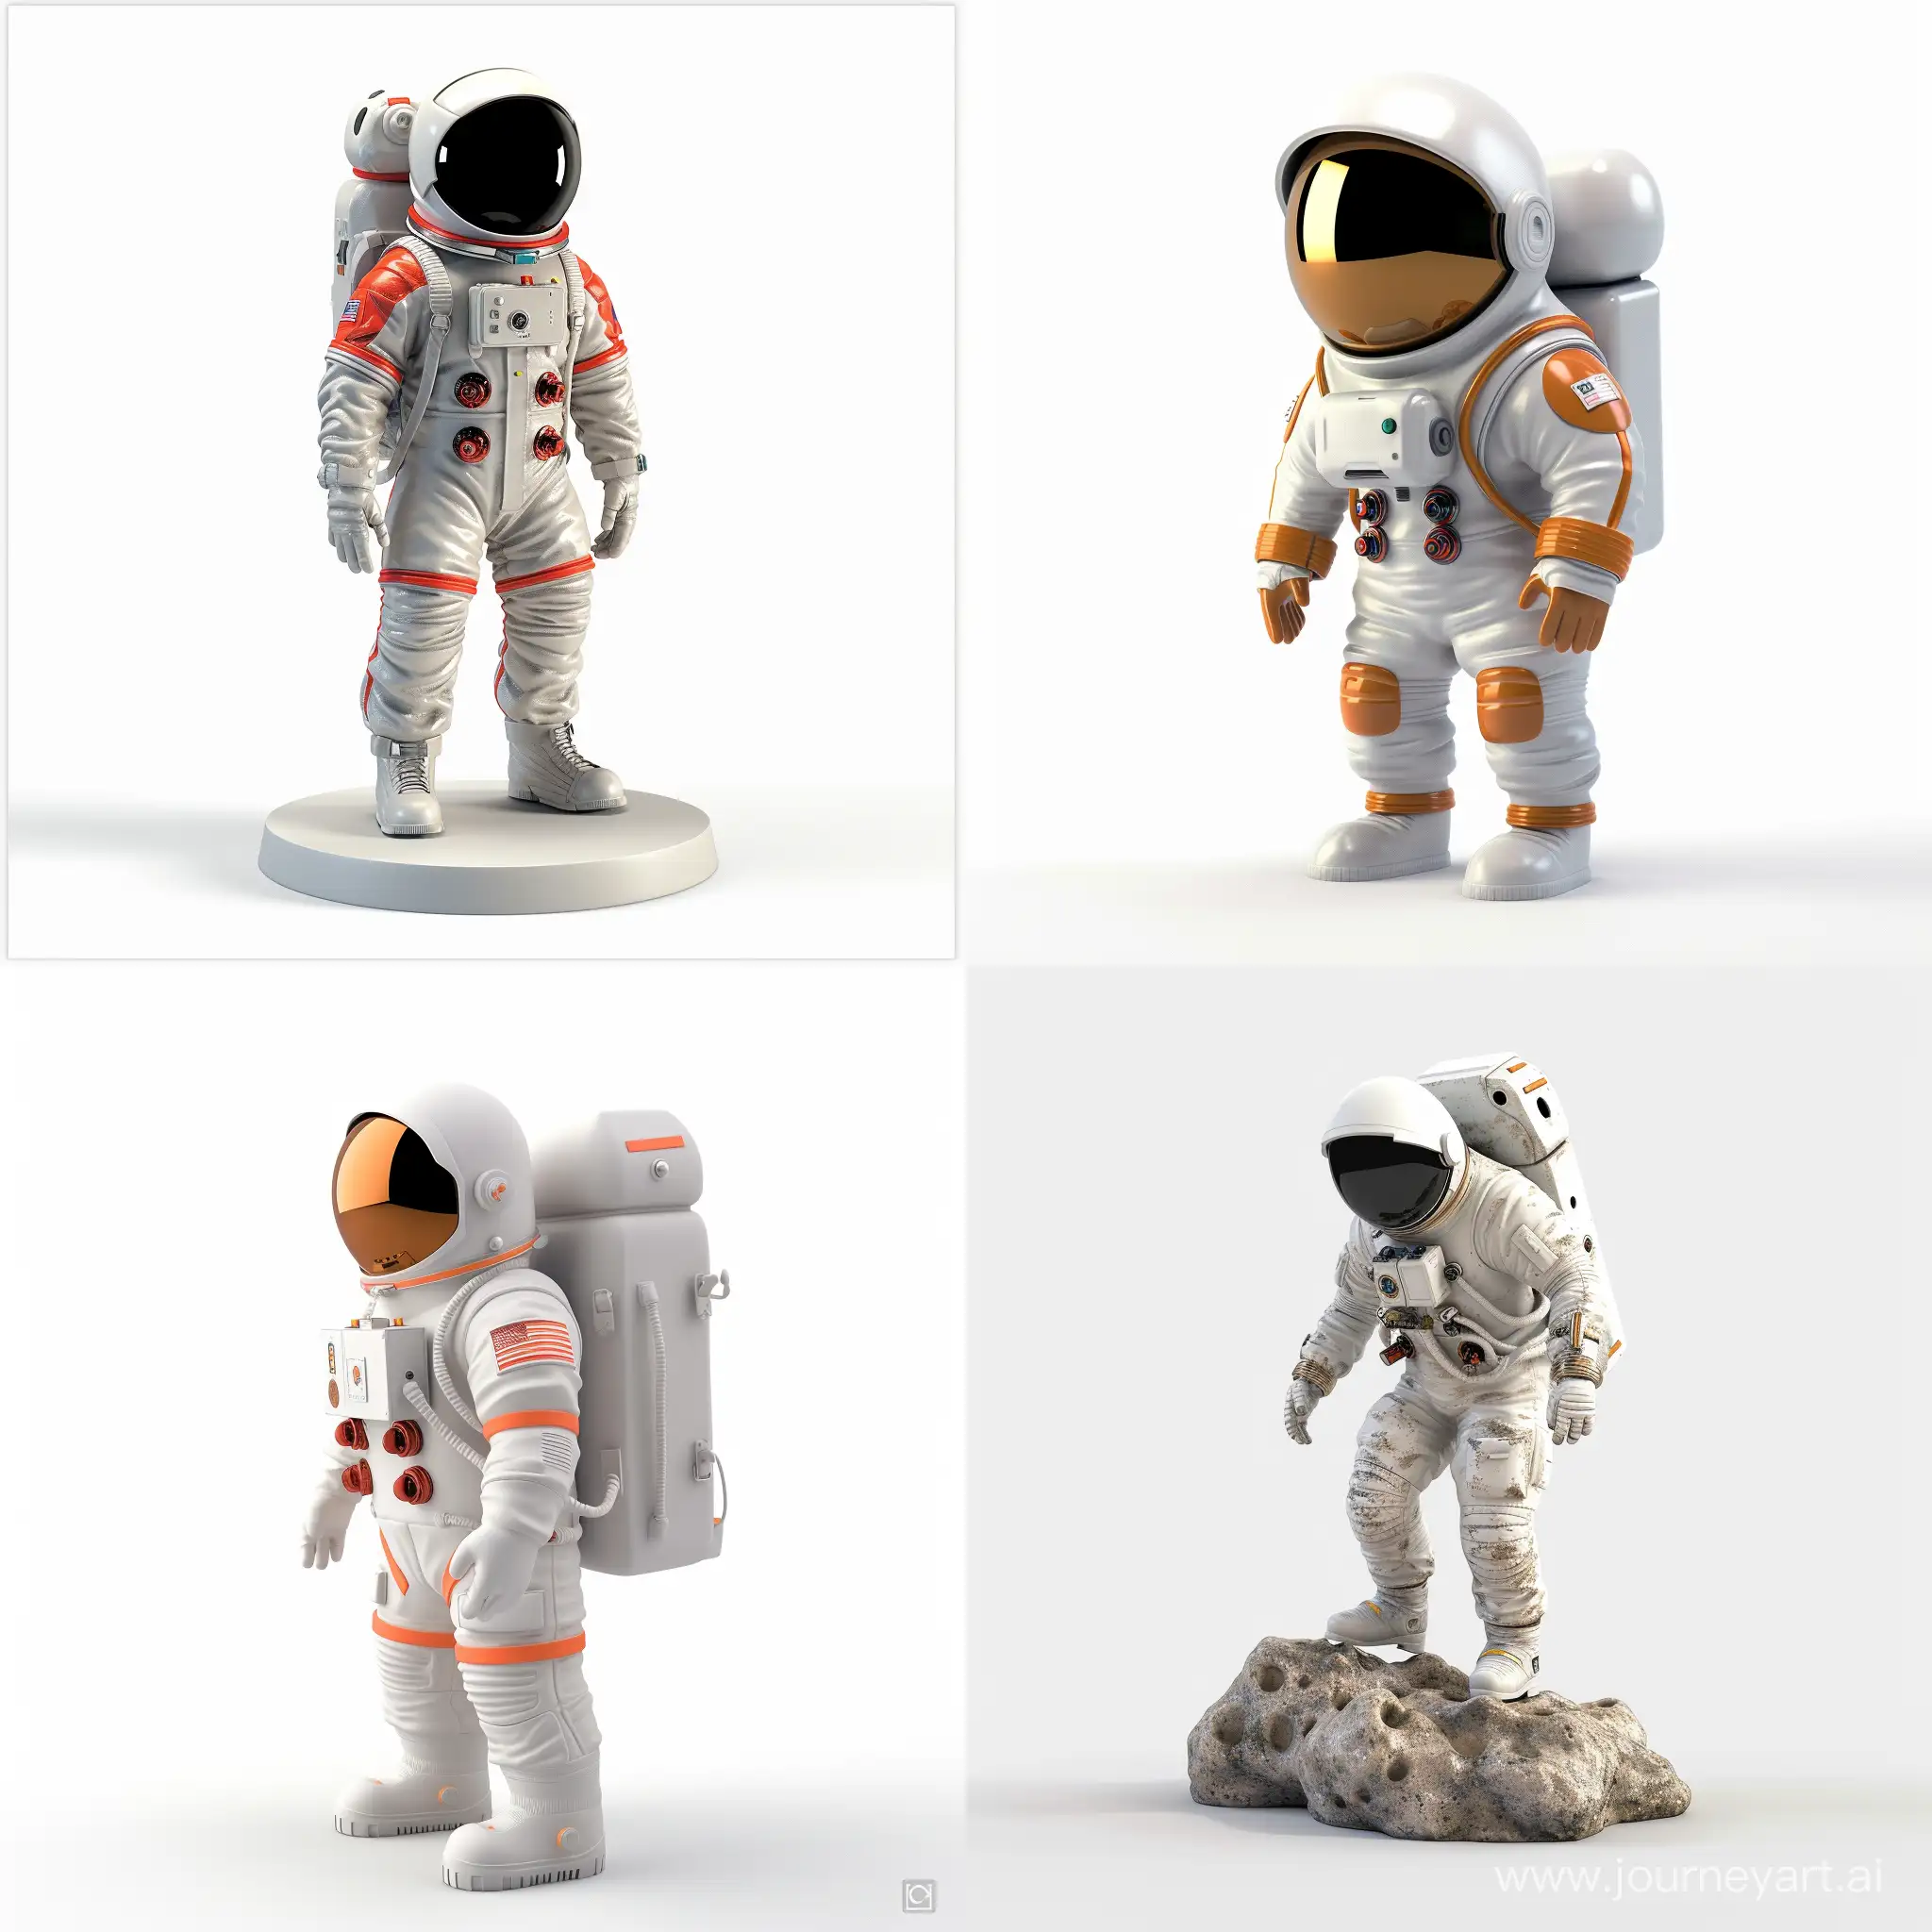 Space-Explorer-Astronaut-in-3D-Render-on-White-Background